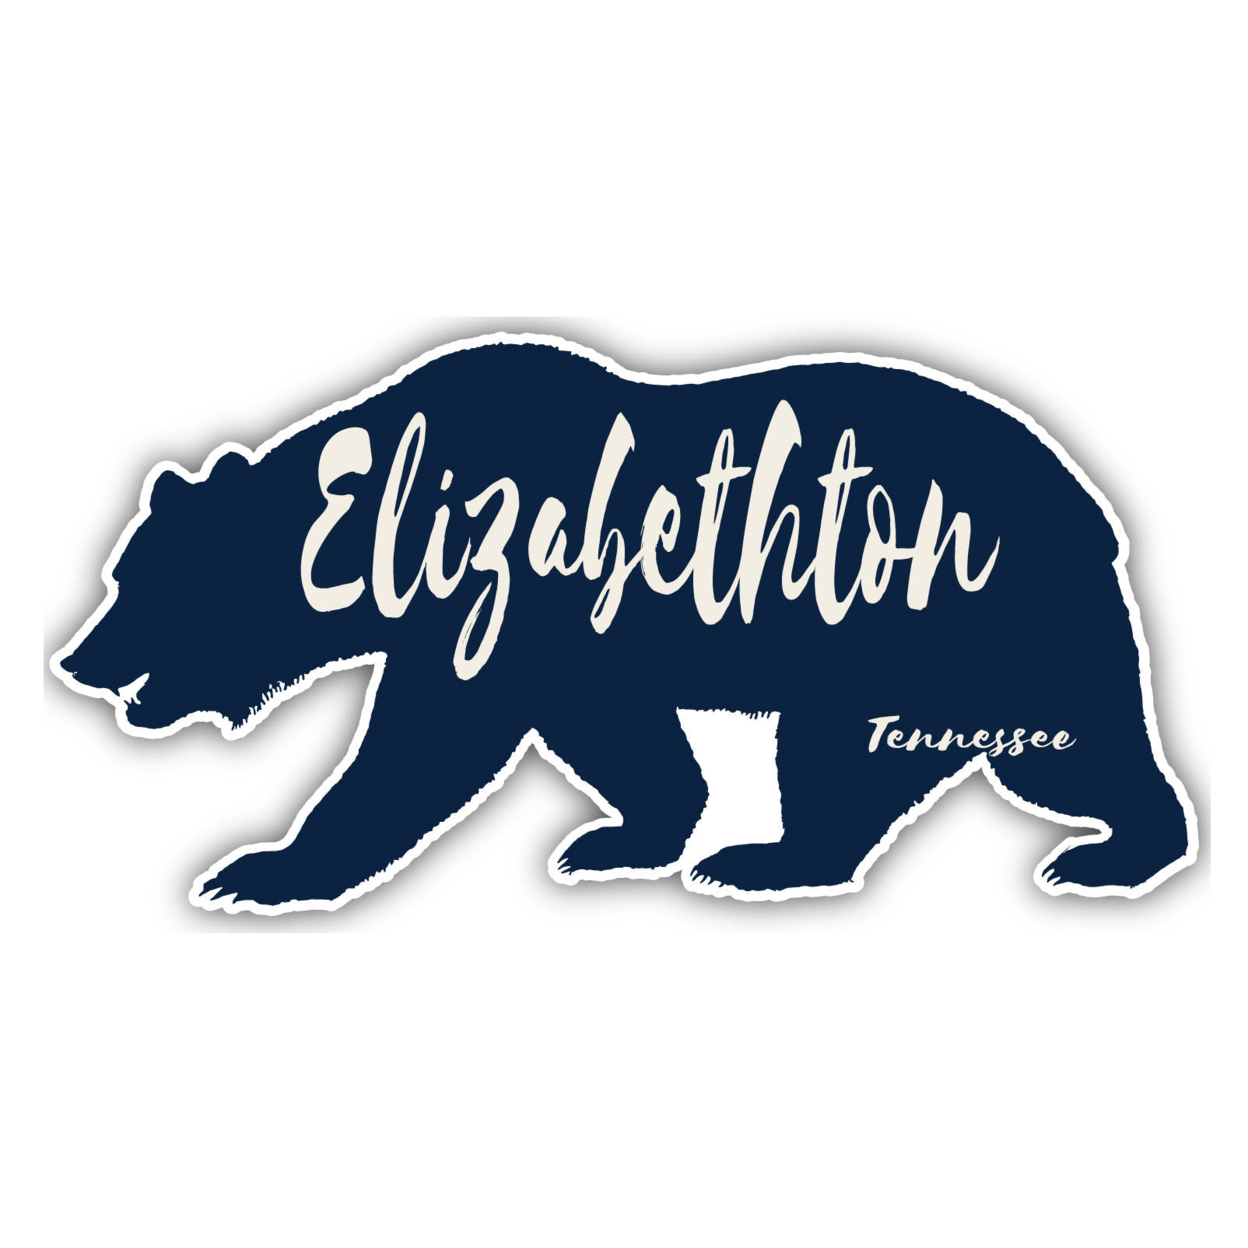 Elizabethton Tennessee Souvenir Decorative Stickers (Choose Theme And Size) - 4-Pack, 2-Inch, Bear